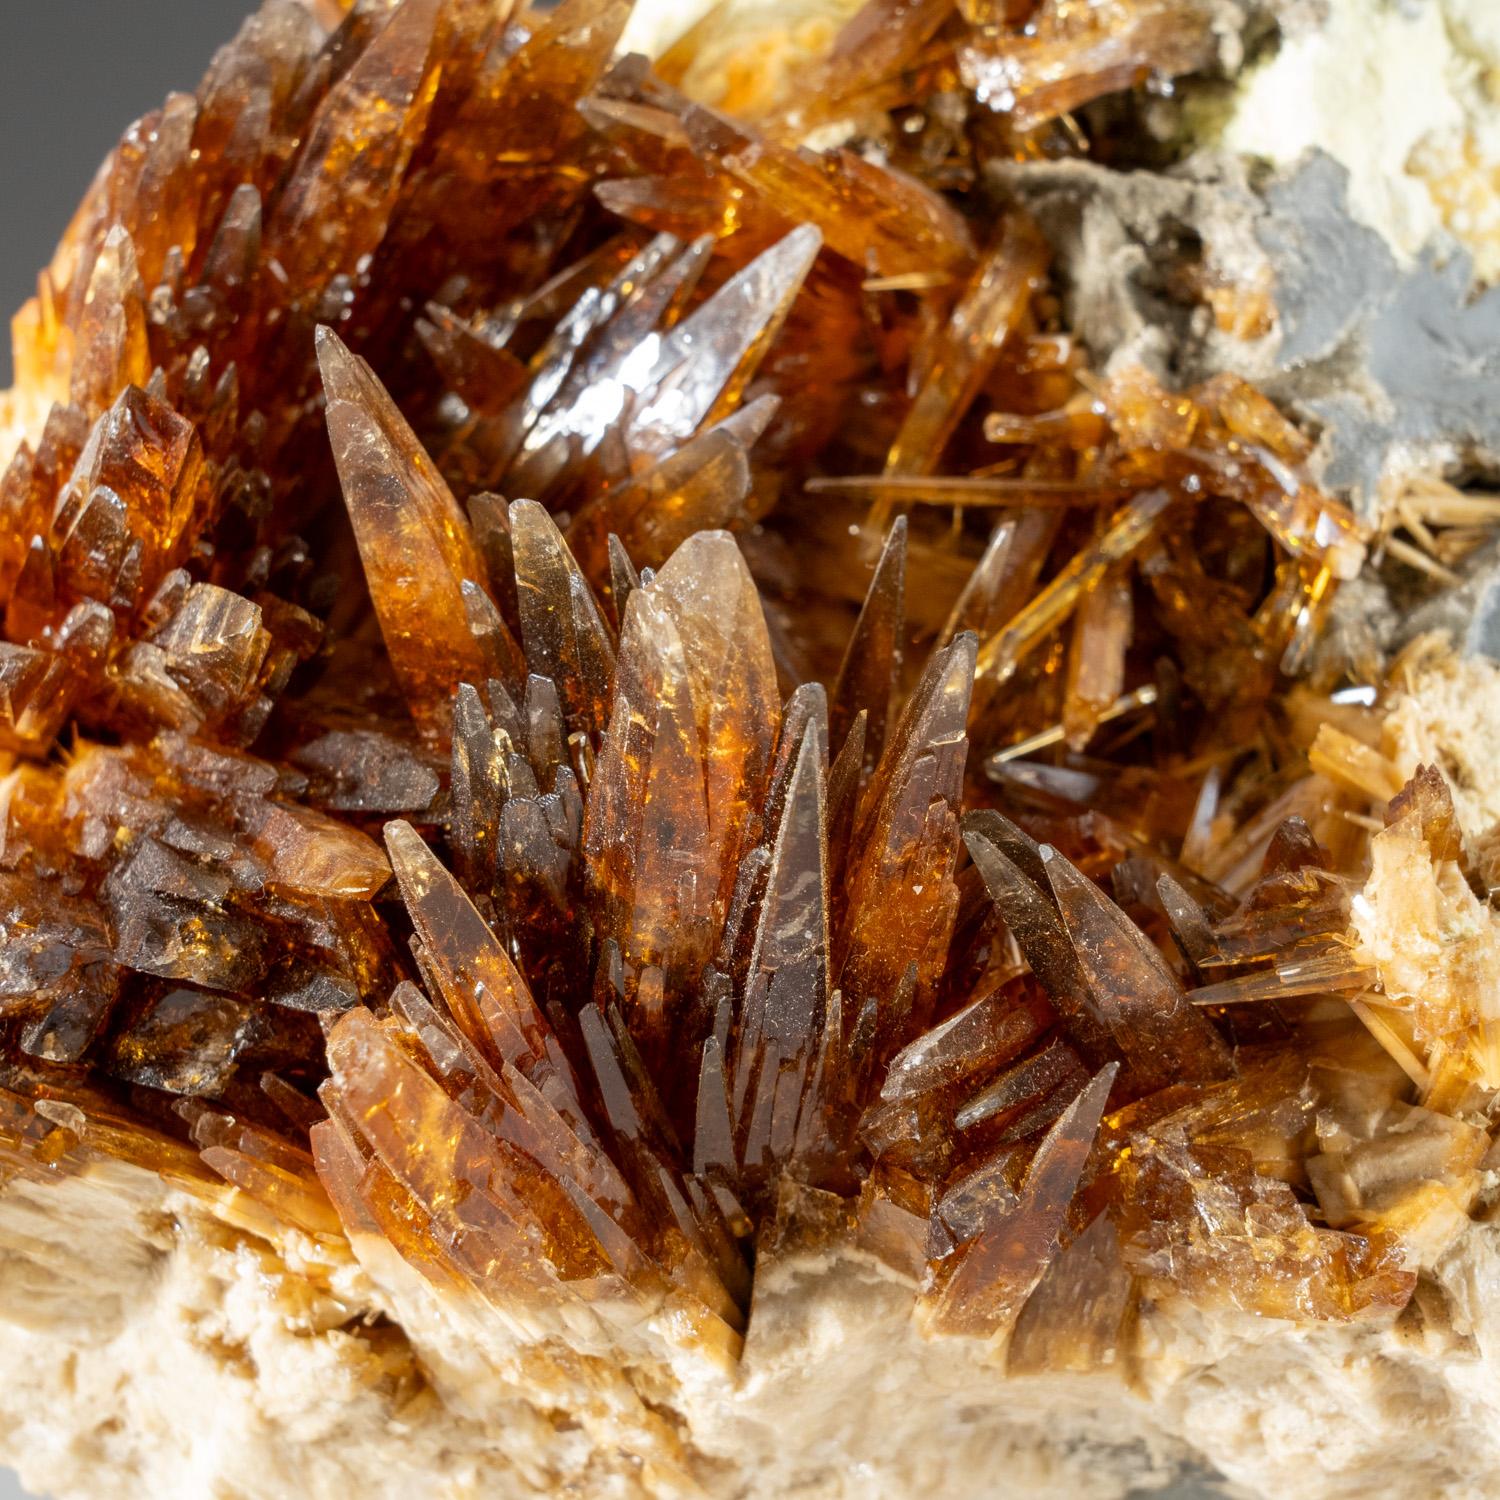 From Machow Mine, Tarnobrzeg, Poland

Diverging sprays of transparent, golden barite crystals on matrix with yellow iron. The barite crystals are elongated, prismatic crystals with glassy surface luster. 


Weight: 3 lbs, Dimensions: 4 x 3 x 5 inches